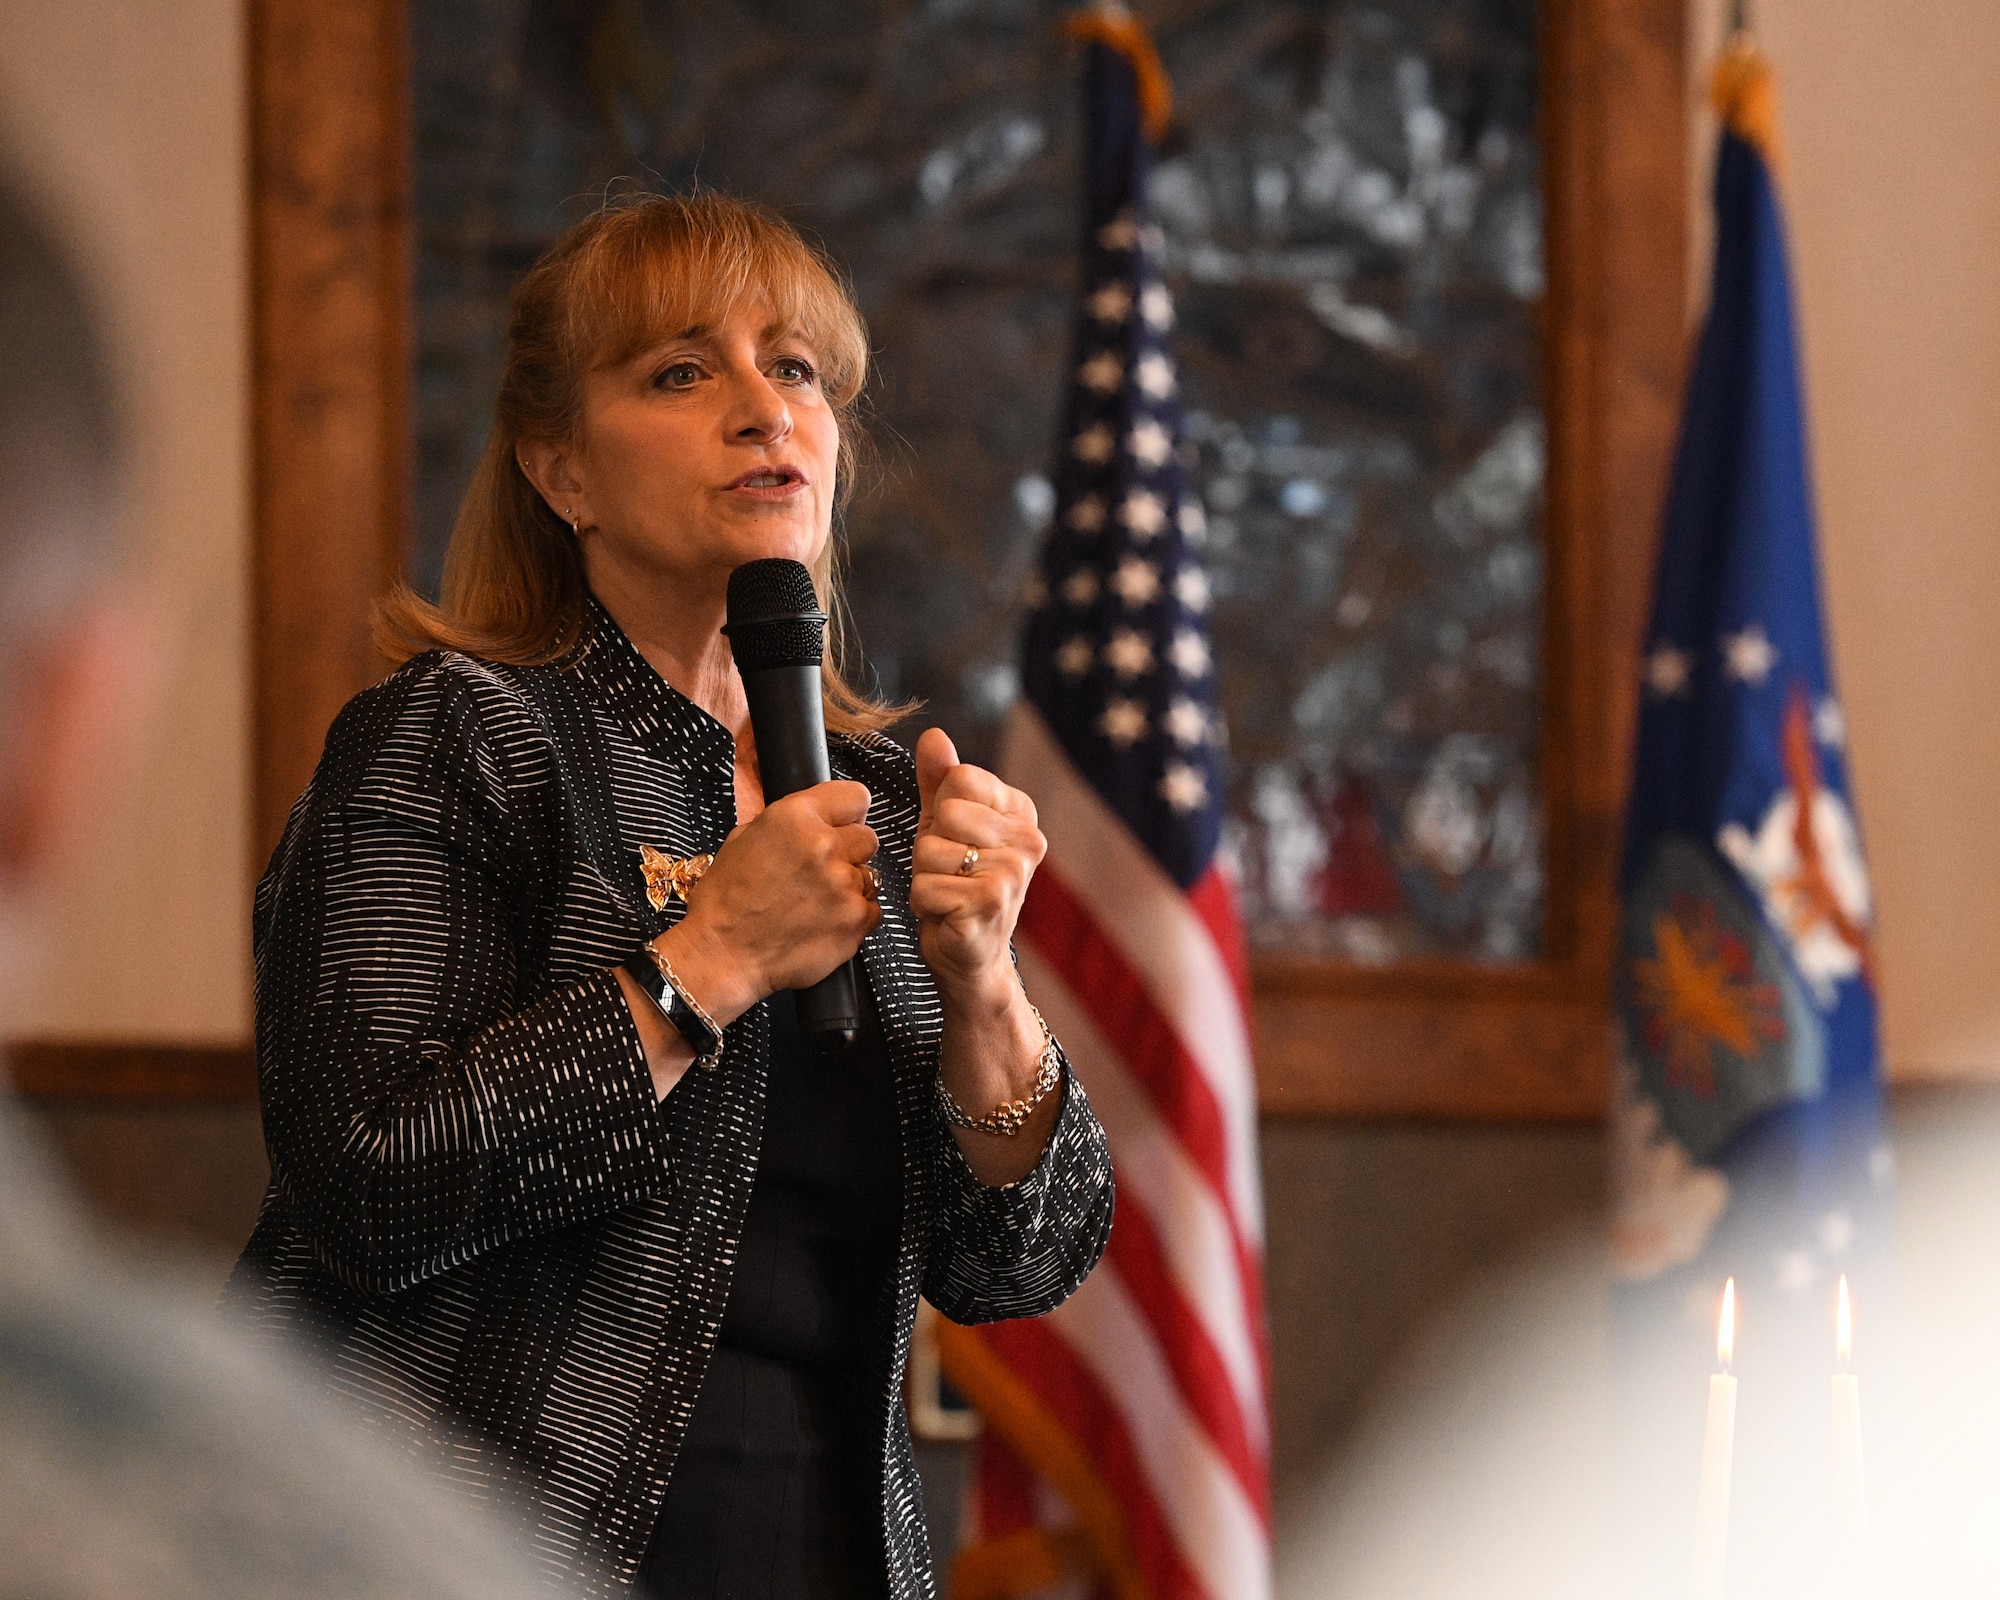 Diane Warsoff speaks during the Holocaust Days of Remembrance Service April 18, 2018, at Hill Air Force Base, Utah. Warsoff is a second-generation Holocaust survivor. Her mother and grandparents survived the Holocaust by hiding in France during World War II. In 2015, she traveled to Europe and met the family that rescued her mother and grandparents. (U.S. Air Force photo by R. Nial Bradshaw)